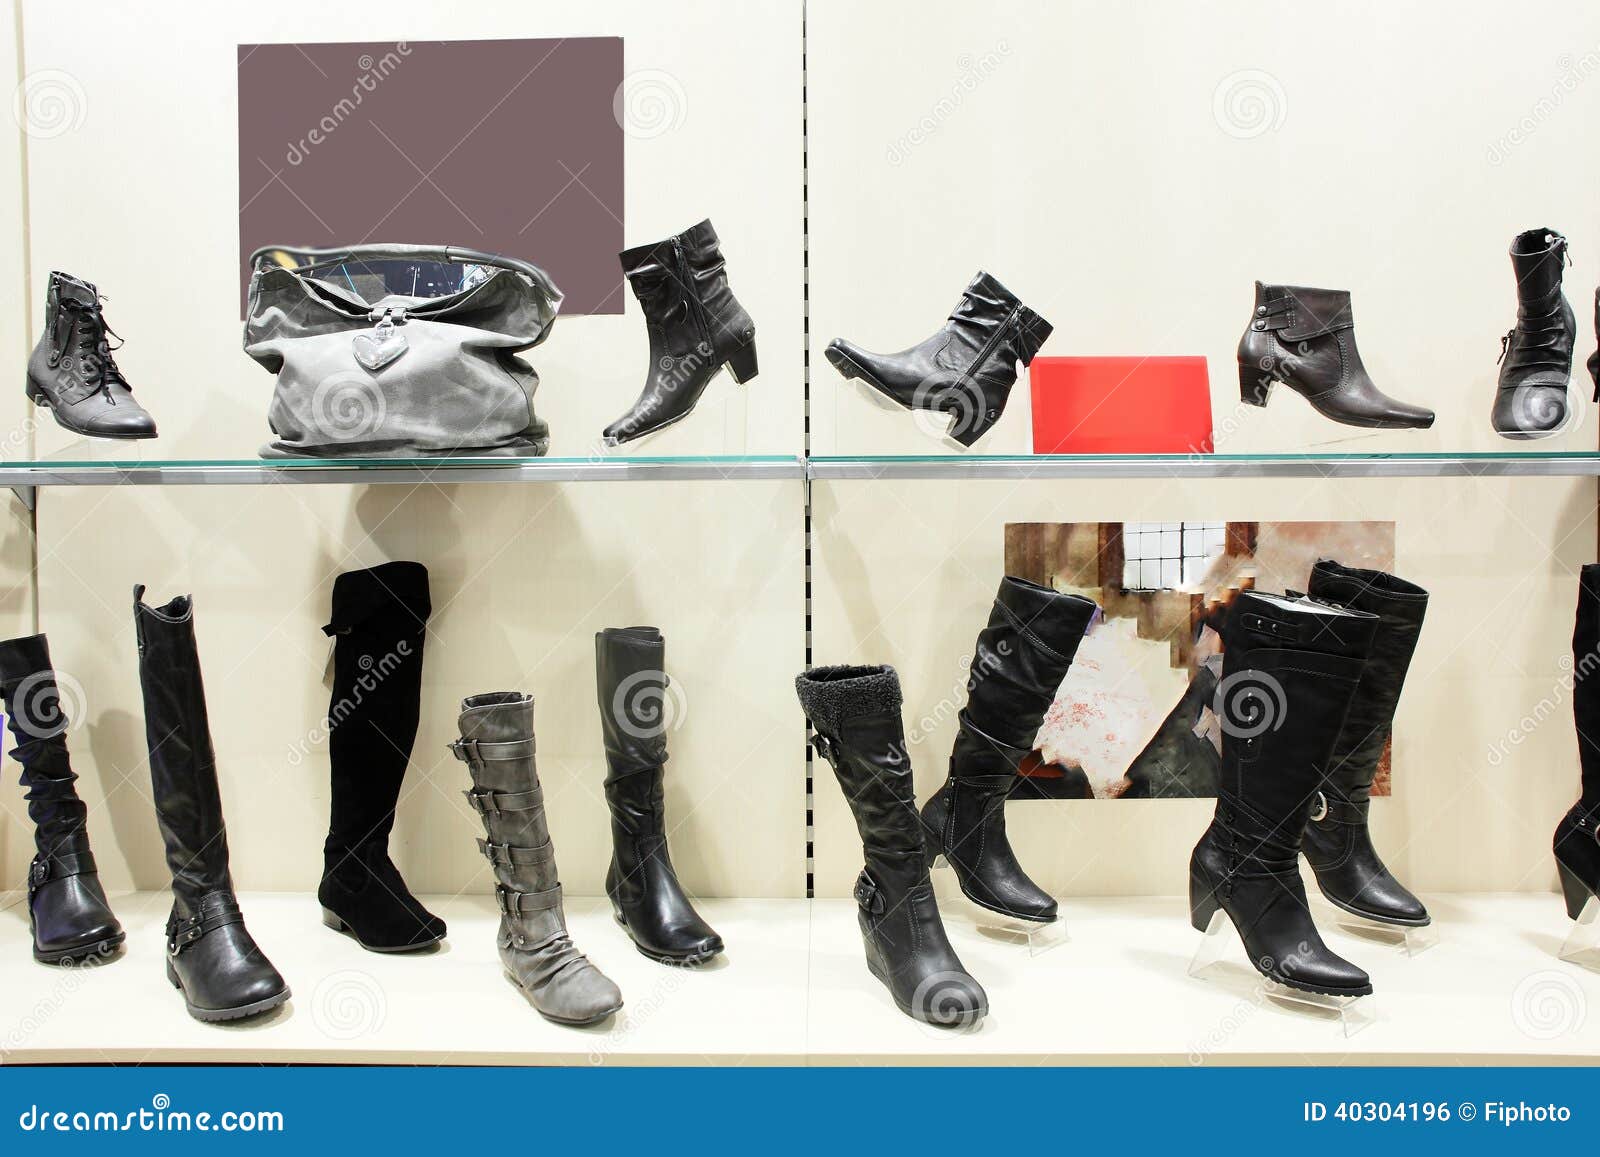 Interior of Shoe Store in Modern European Mall Stock Photo - Image of ...